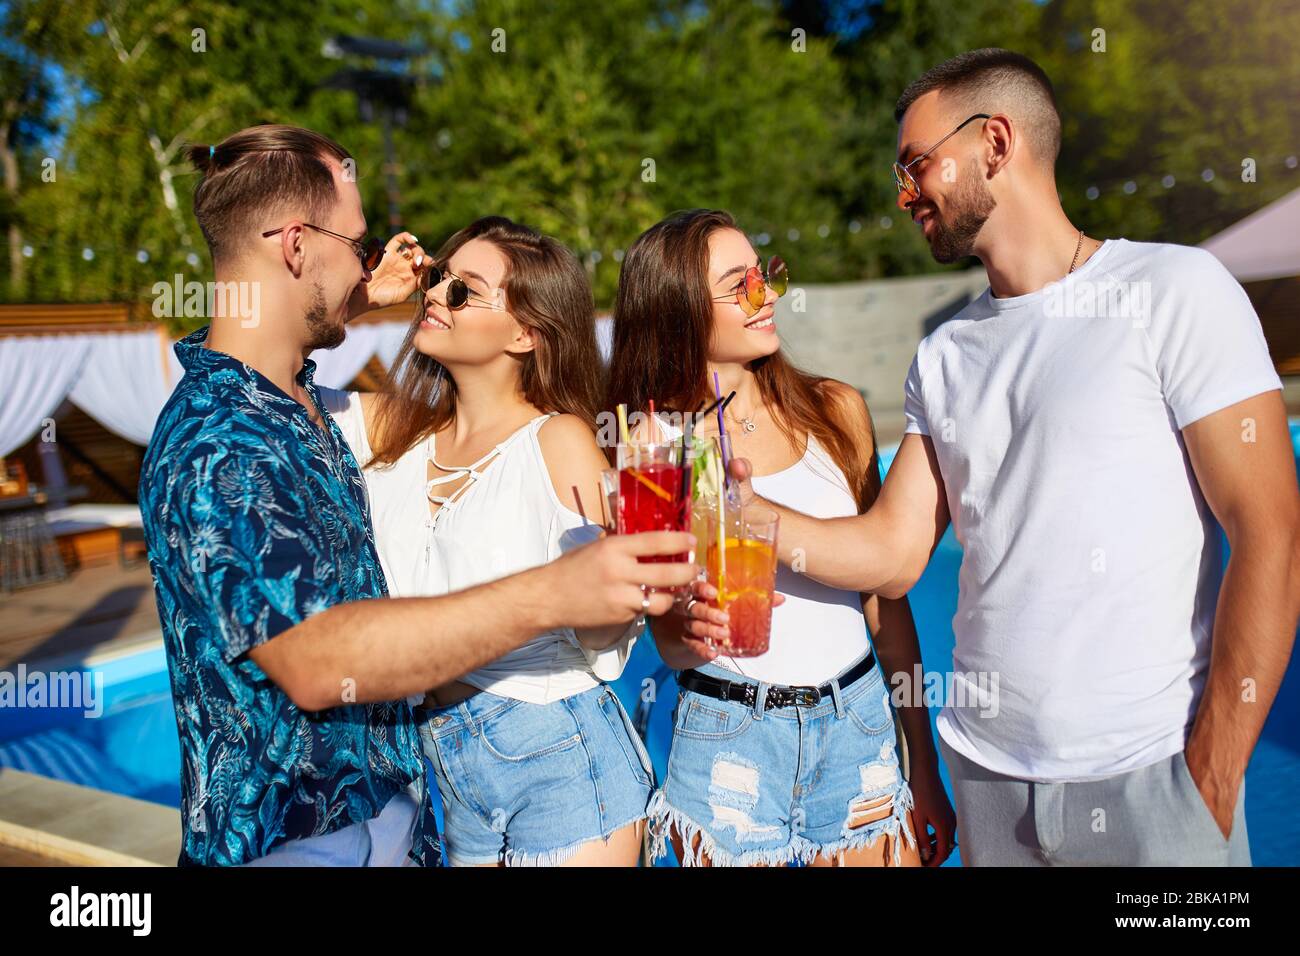 https://c8.alamy.com/comp/2BKA1PM/group-of-friends-having-fun-at-poolside-summer-party-clinking-glasses-with-summer-cocktails-on-sunny-day-near-swimming-pool-people-toast-drinking-2BKA1PM.jpg